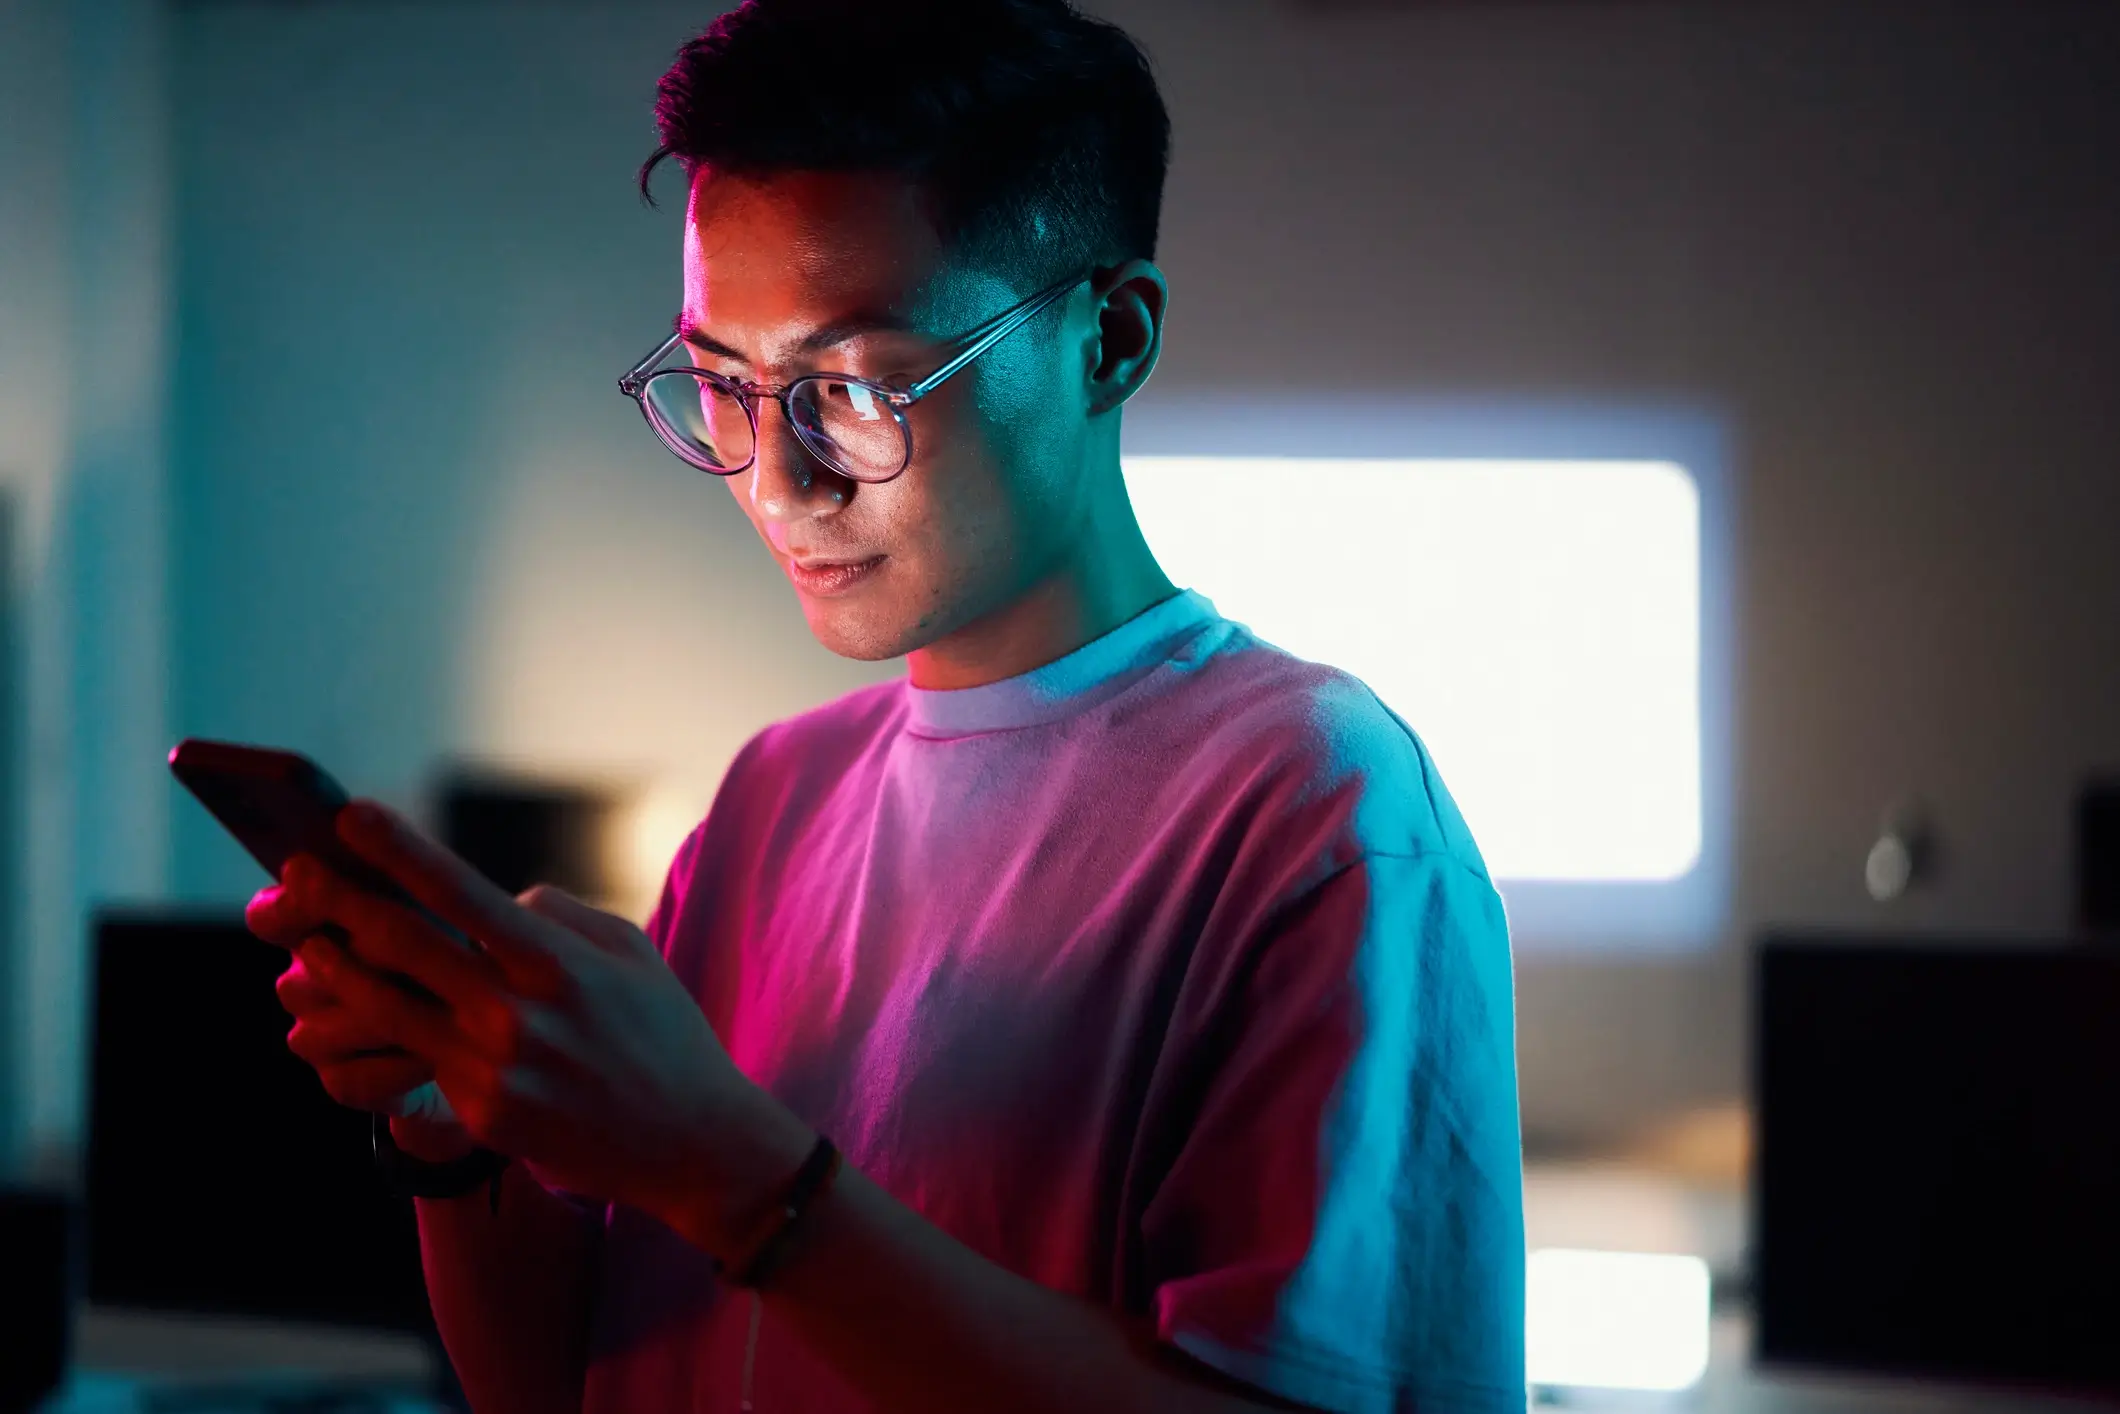 Male standing in an office in a pink light using a smartphone